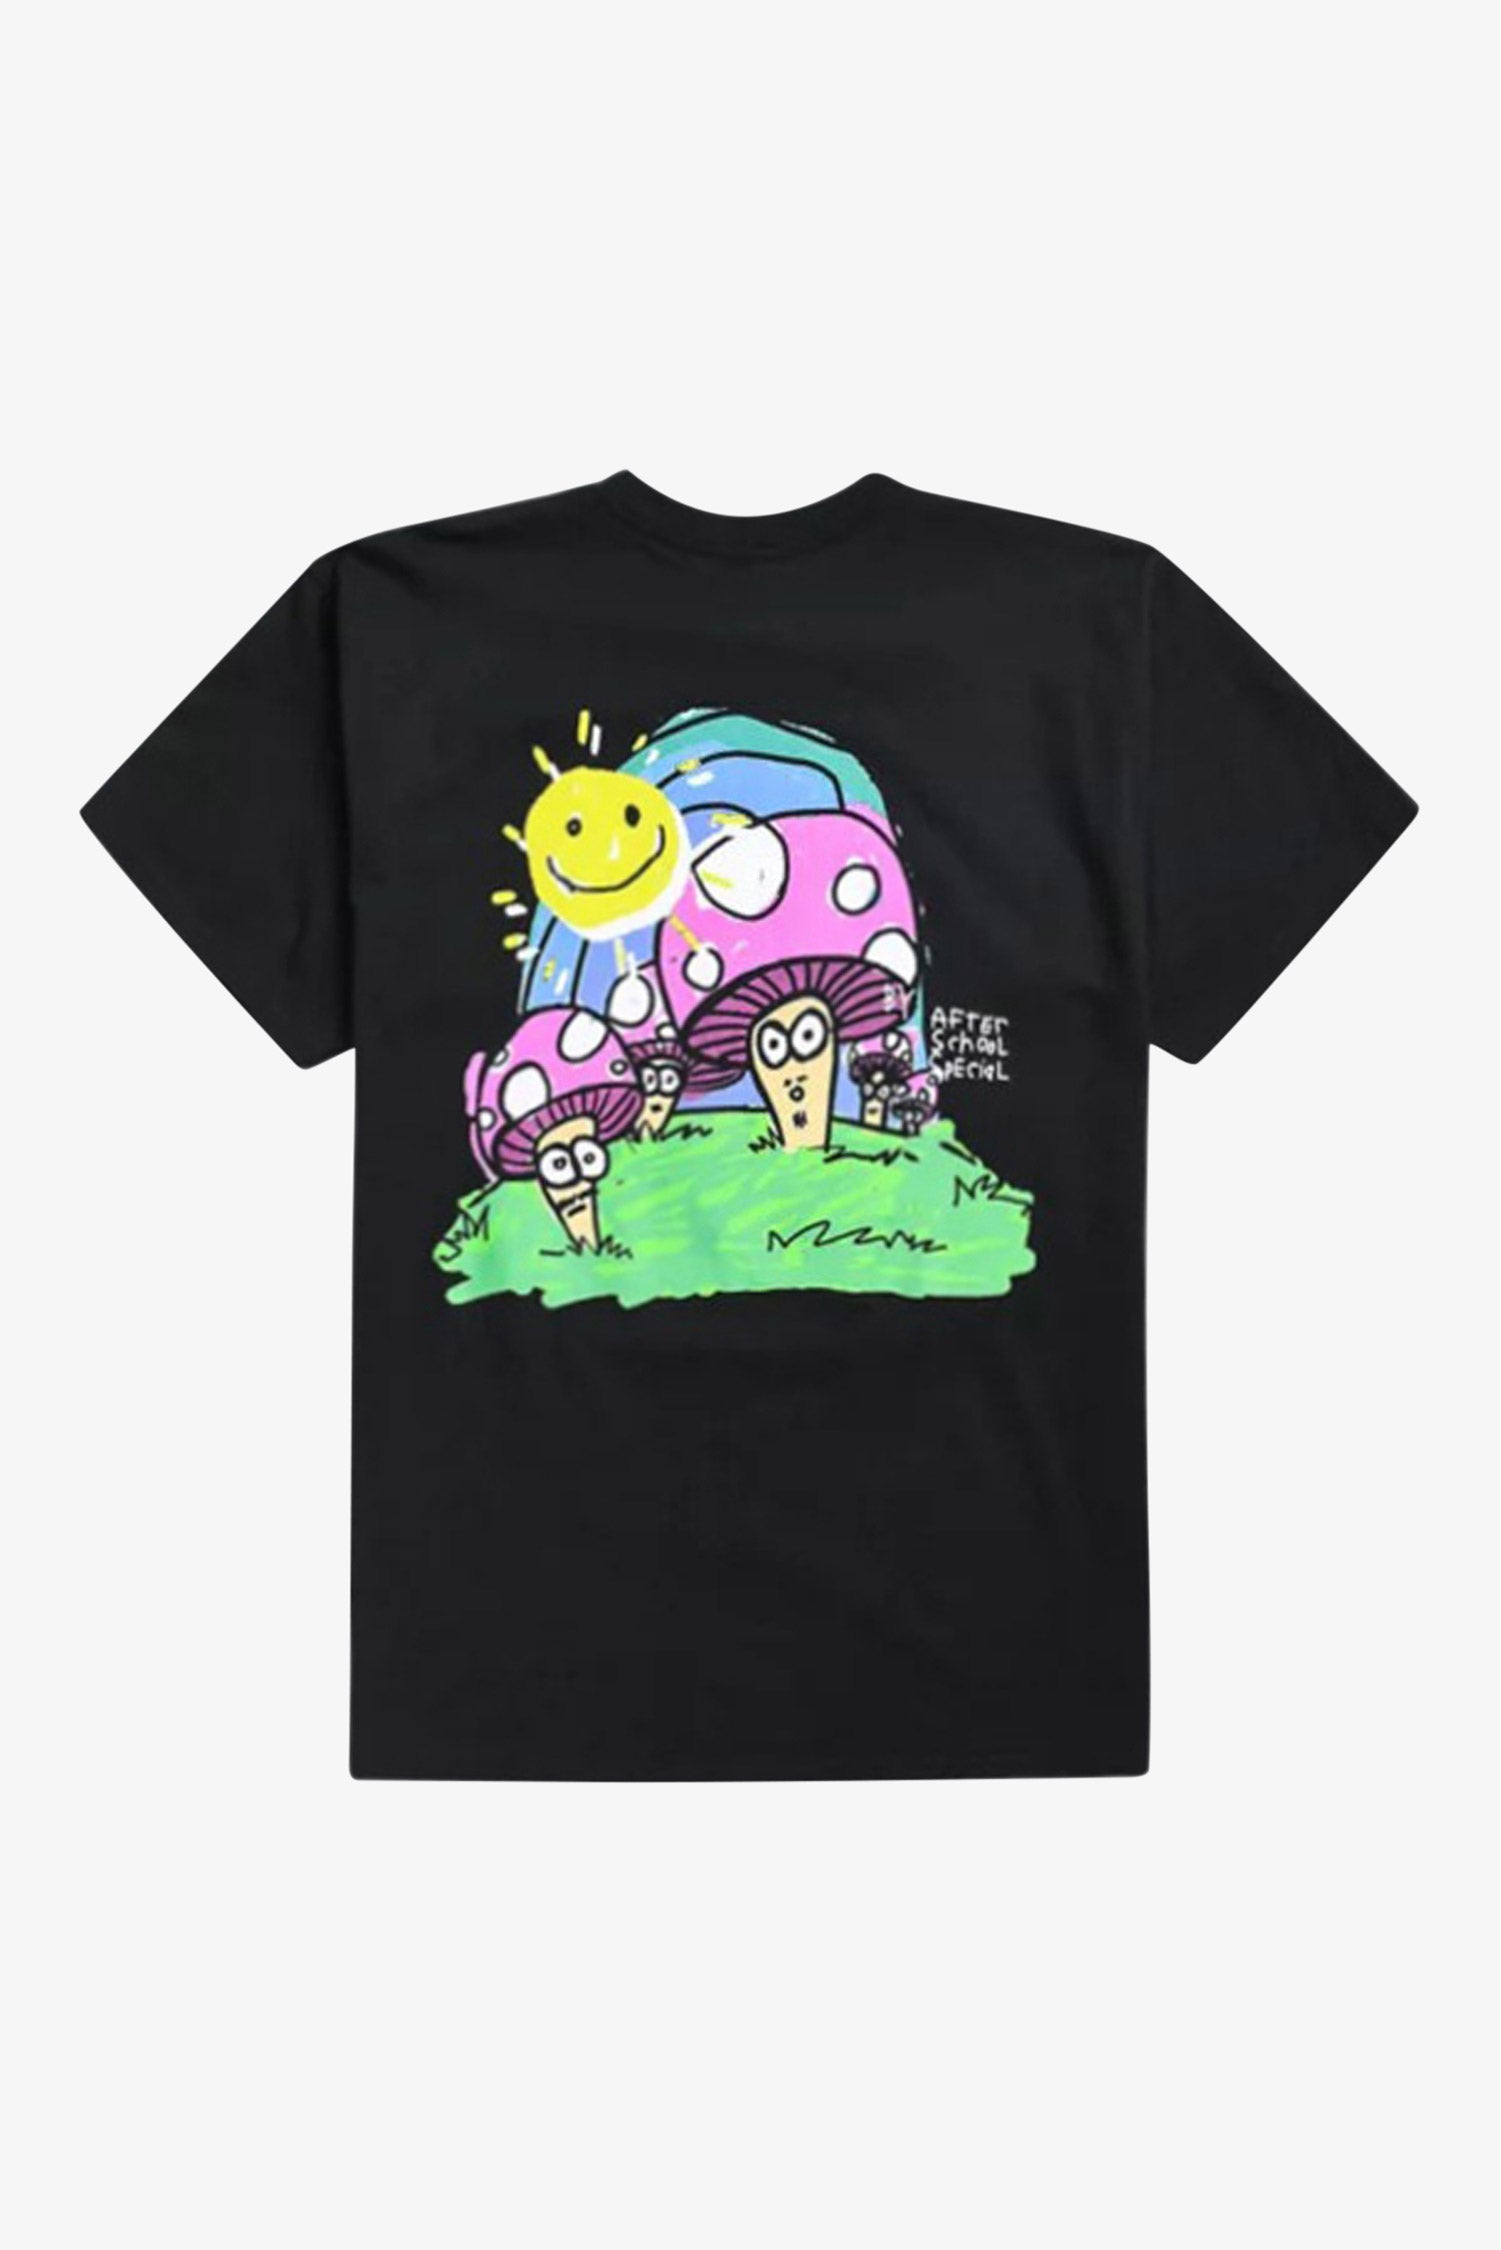 Selectshop FRAME - AFTER SCHOOL SPECIAL Trippy Tee T-Shirts Dubai